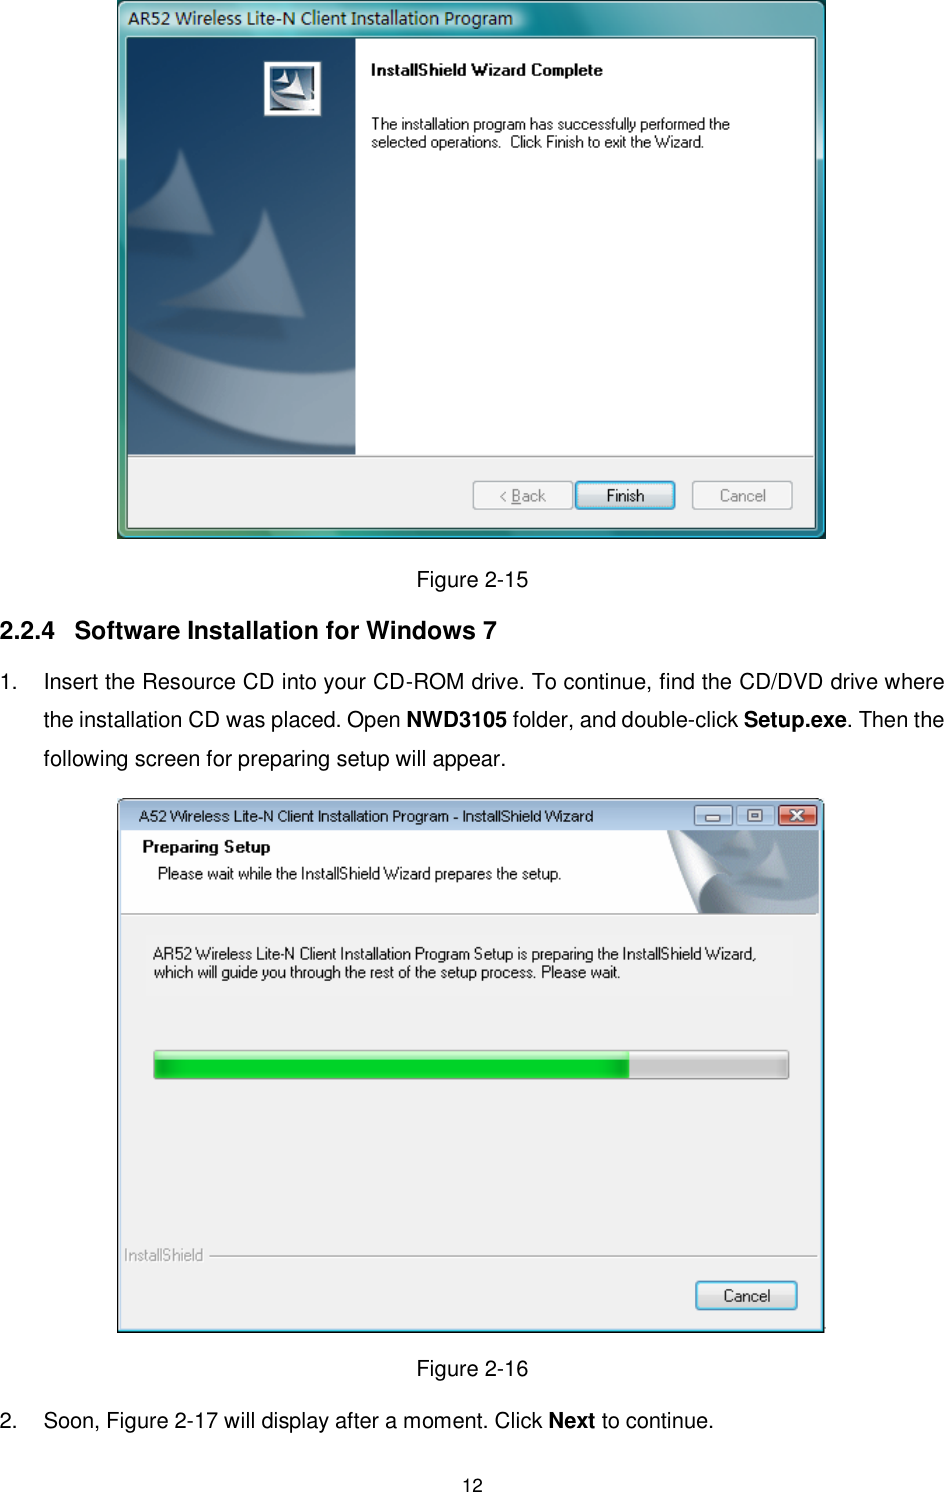  12  Figure 2-15 2.2.4  Software Installation for Windows 7 1.  Insert the Resource CD into your CD-ROM drive. To continue, find the CD/DVD drive where the installation CD was placed. Open NWD3105 folder, and double-click Setup.exe. Then the following screen for preparing setup will appear.  Figure 2-16 2.  Soon, Figure 2-17 will display after a moment. Click Next to continue. 